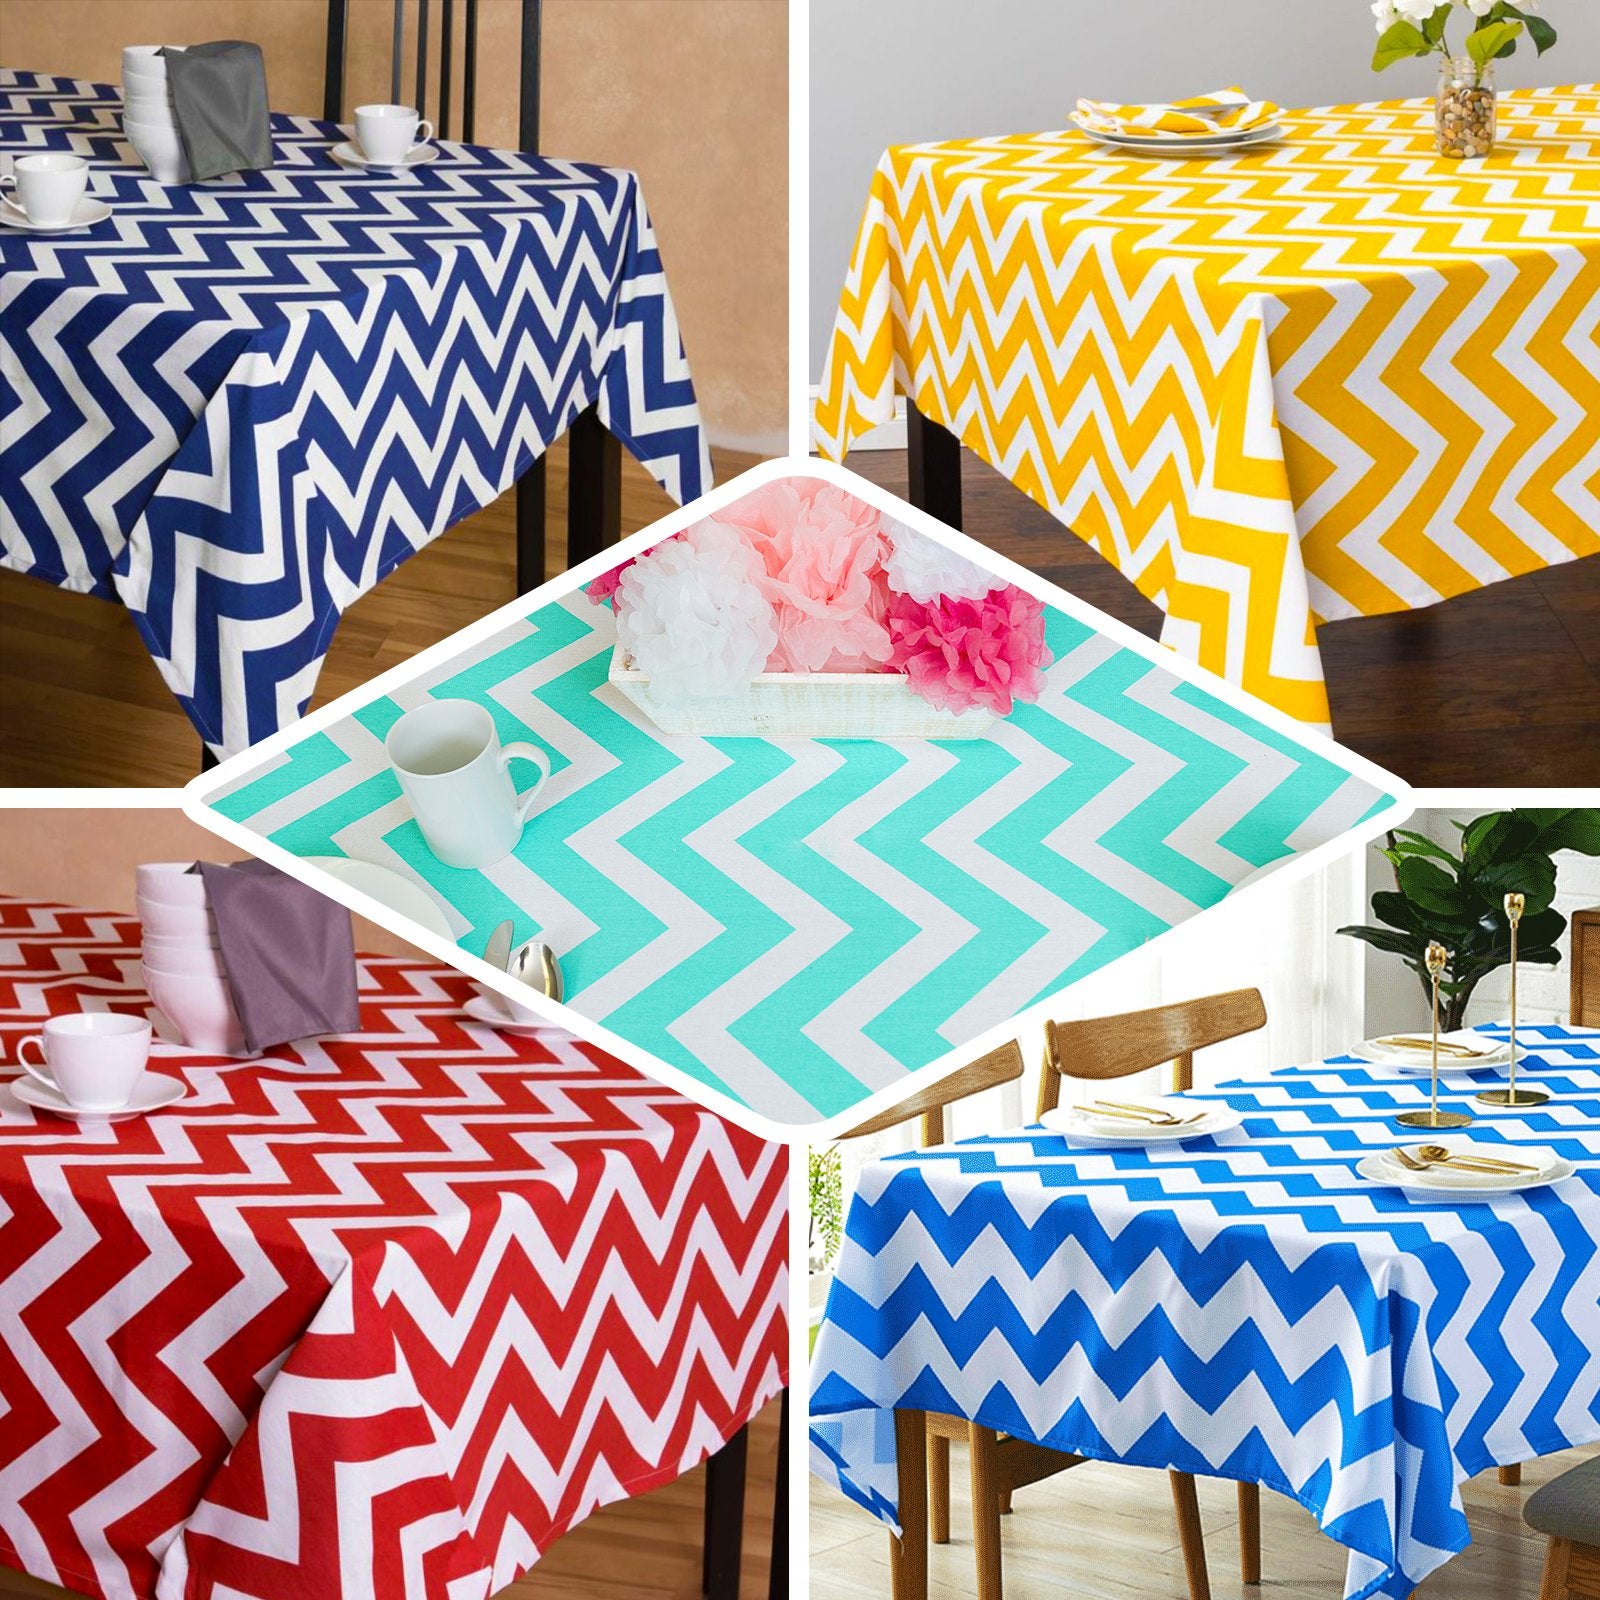 make-your-order-official-of-yellow-chevron-waterproof-plastic-tablecloth-pvc-rectangle-disposable-table-cover-54×72-online_4.jpg